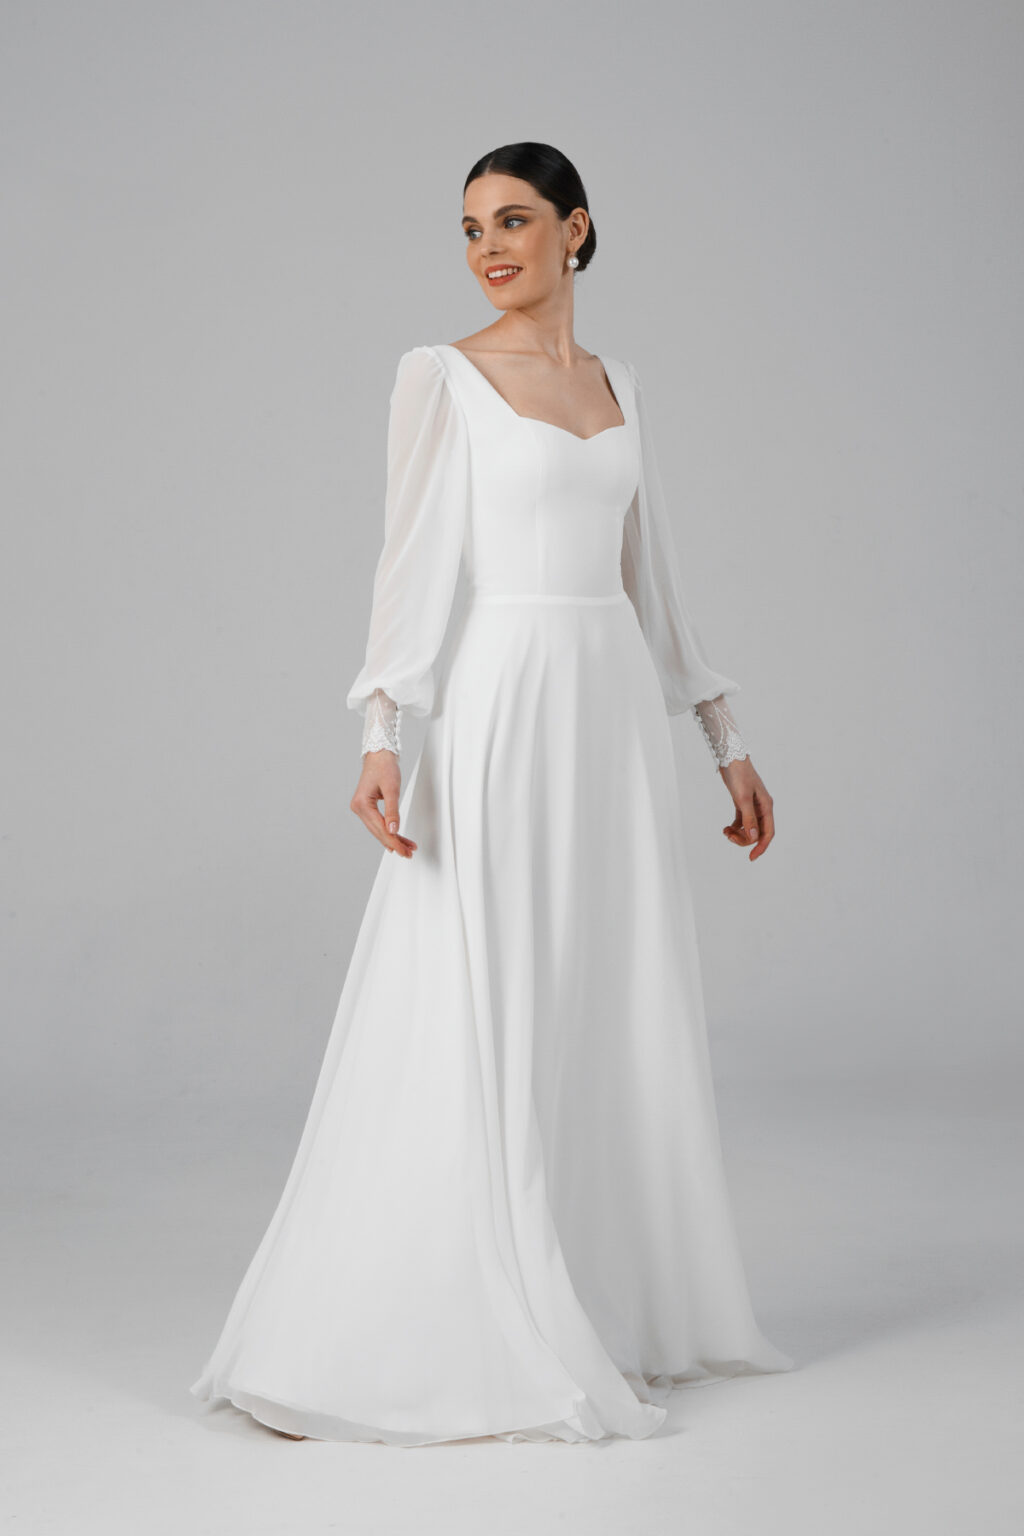 Simple and elegant wedding dress with long sleeves - Emily • Piondress